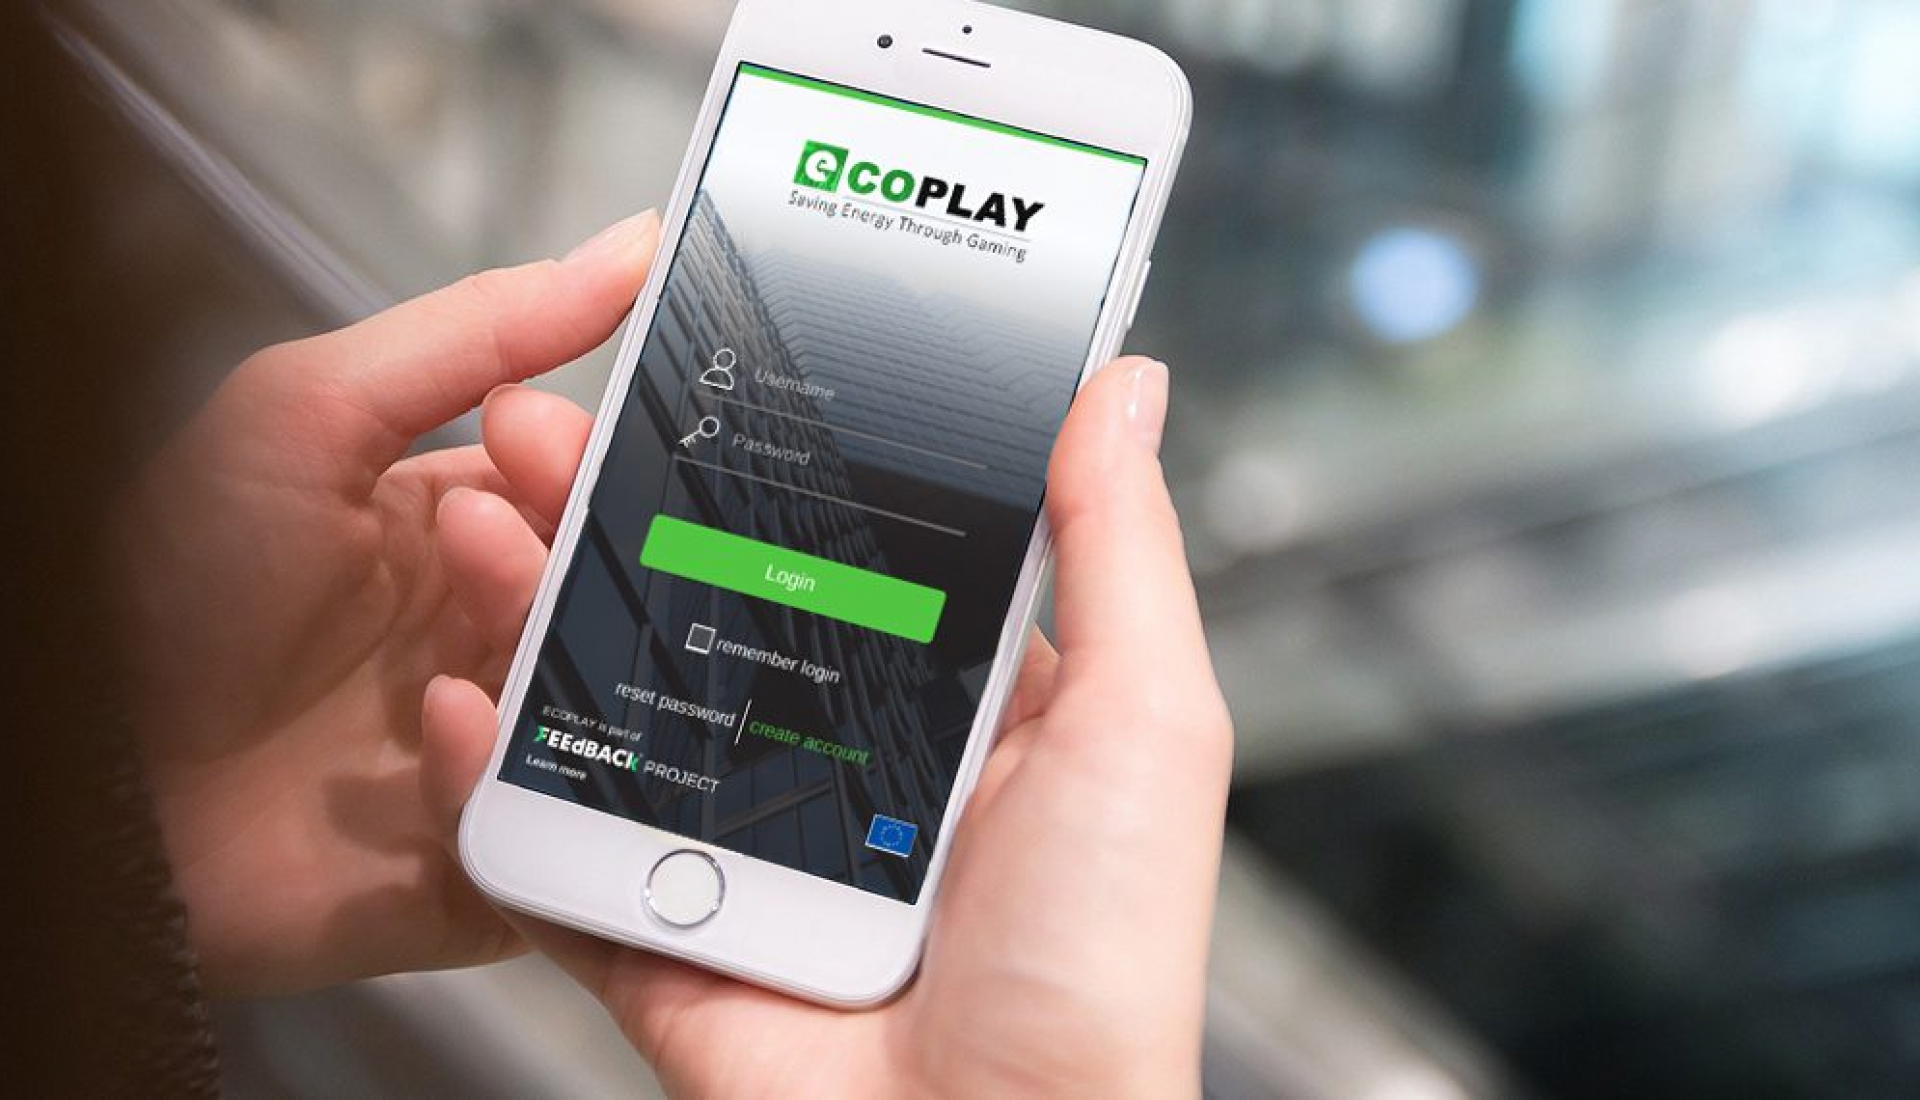 ecoplay:-the-mobile-application-that-helps-you-save-energy-is-now-available-in-six-european-countries